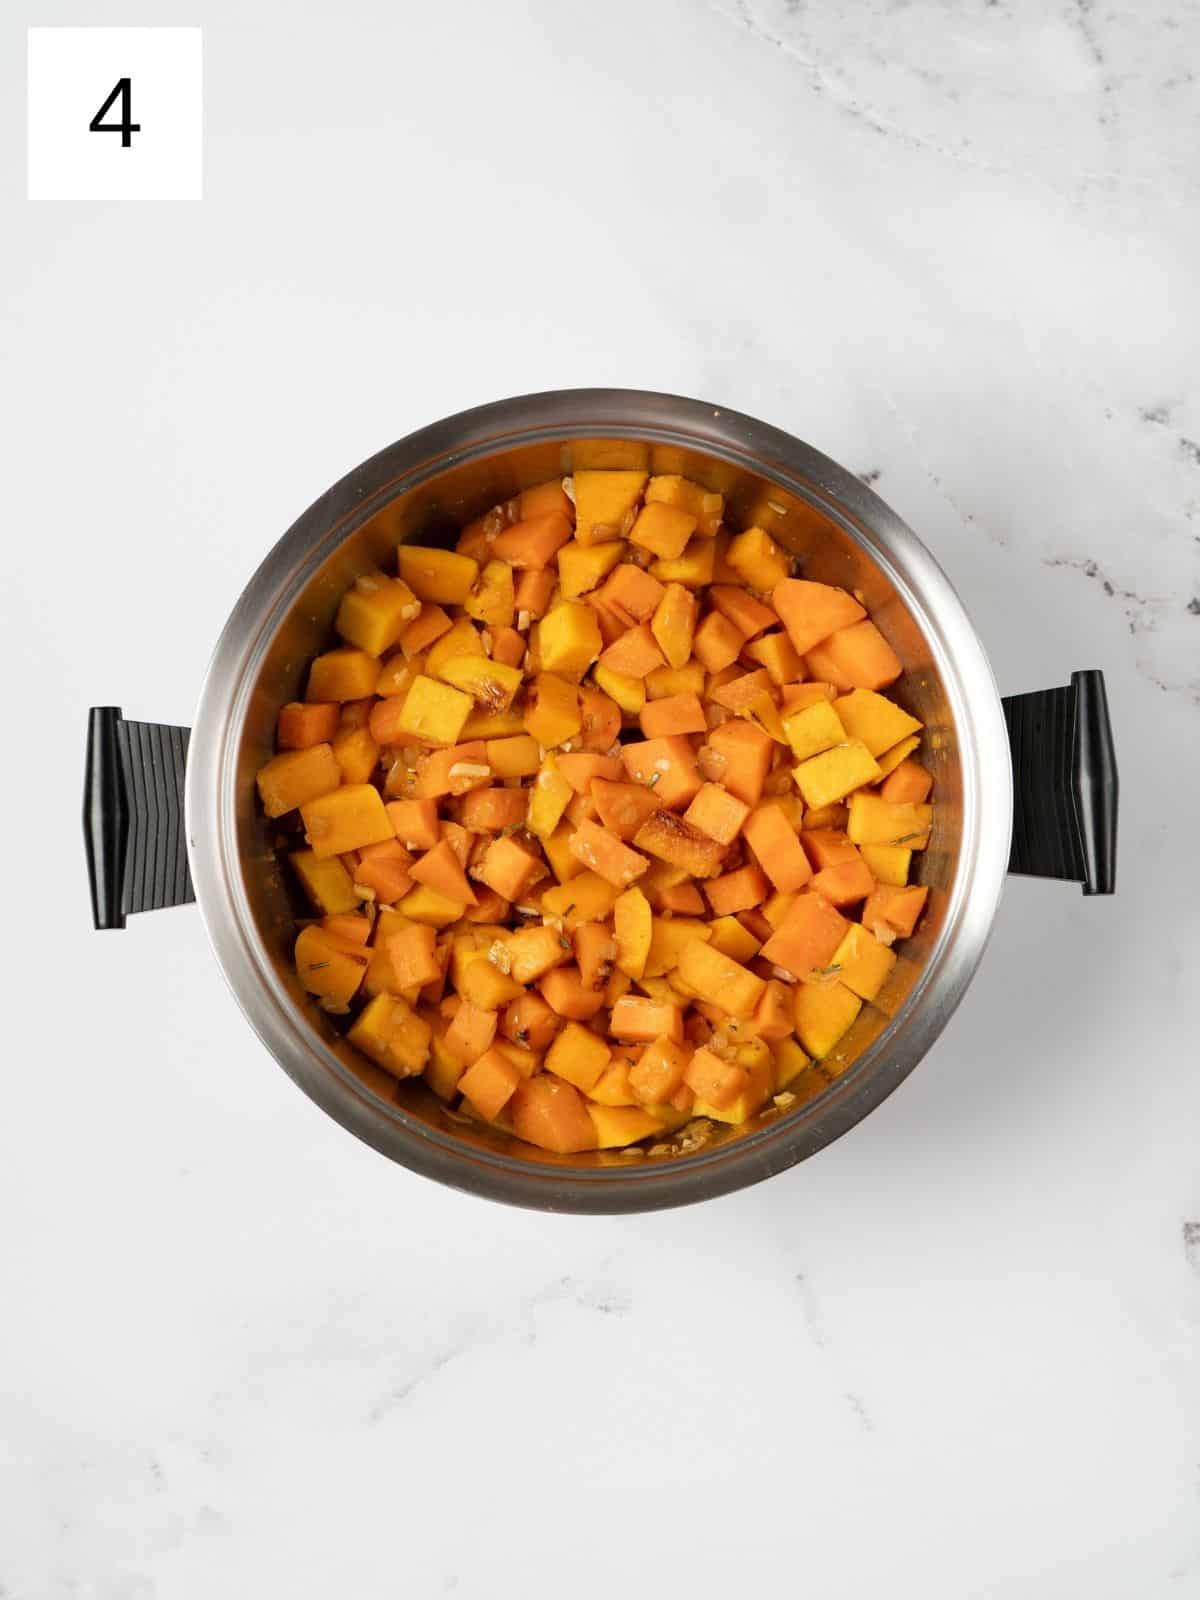 cubed butternut squash and sweet potato on a sautéed mixture of spices.